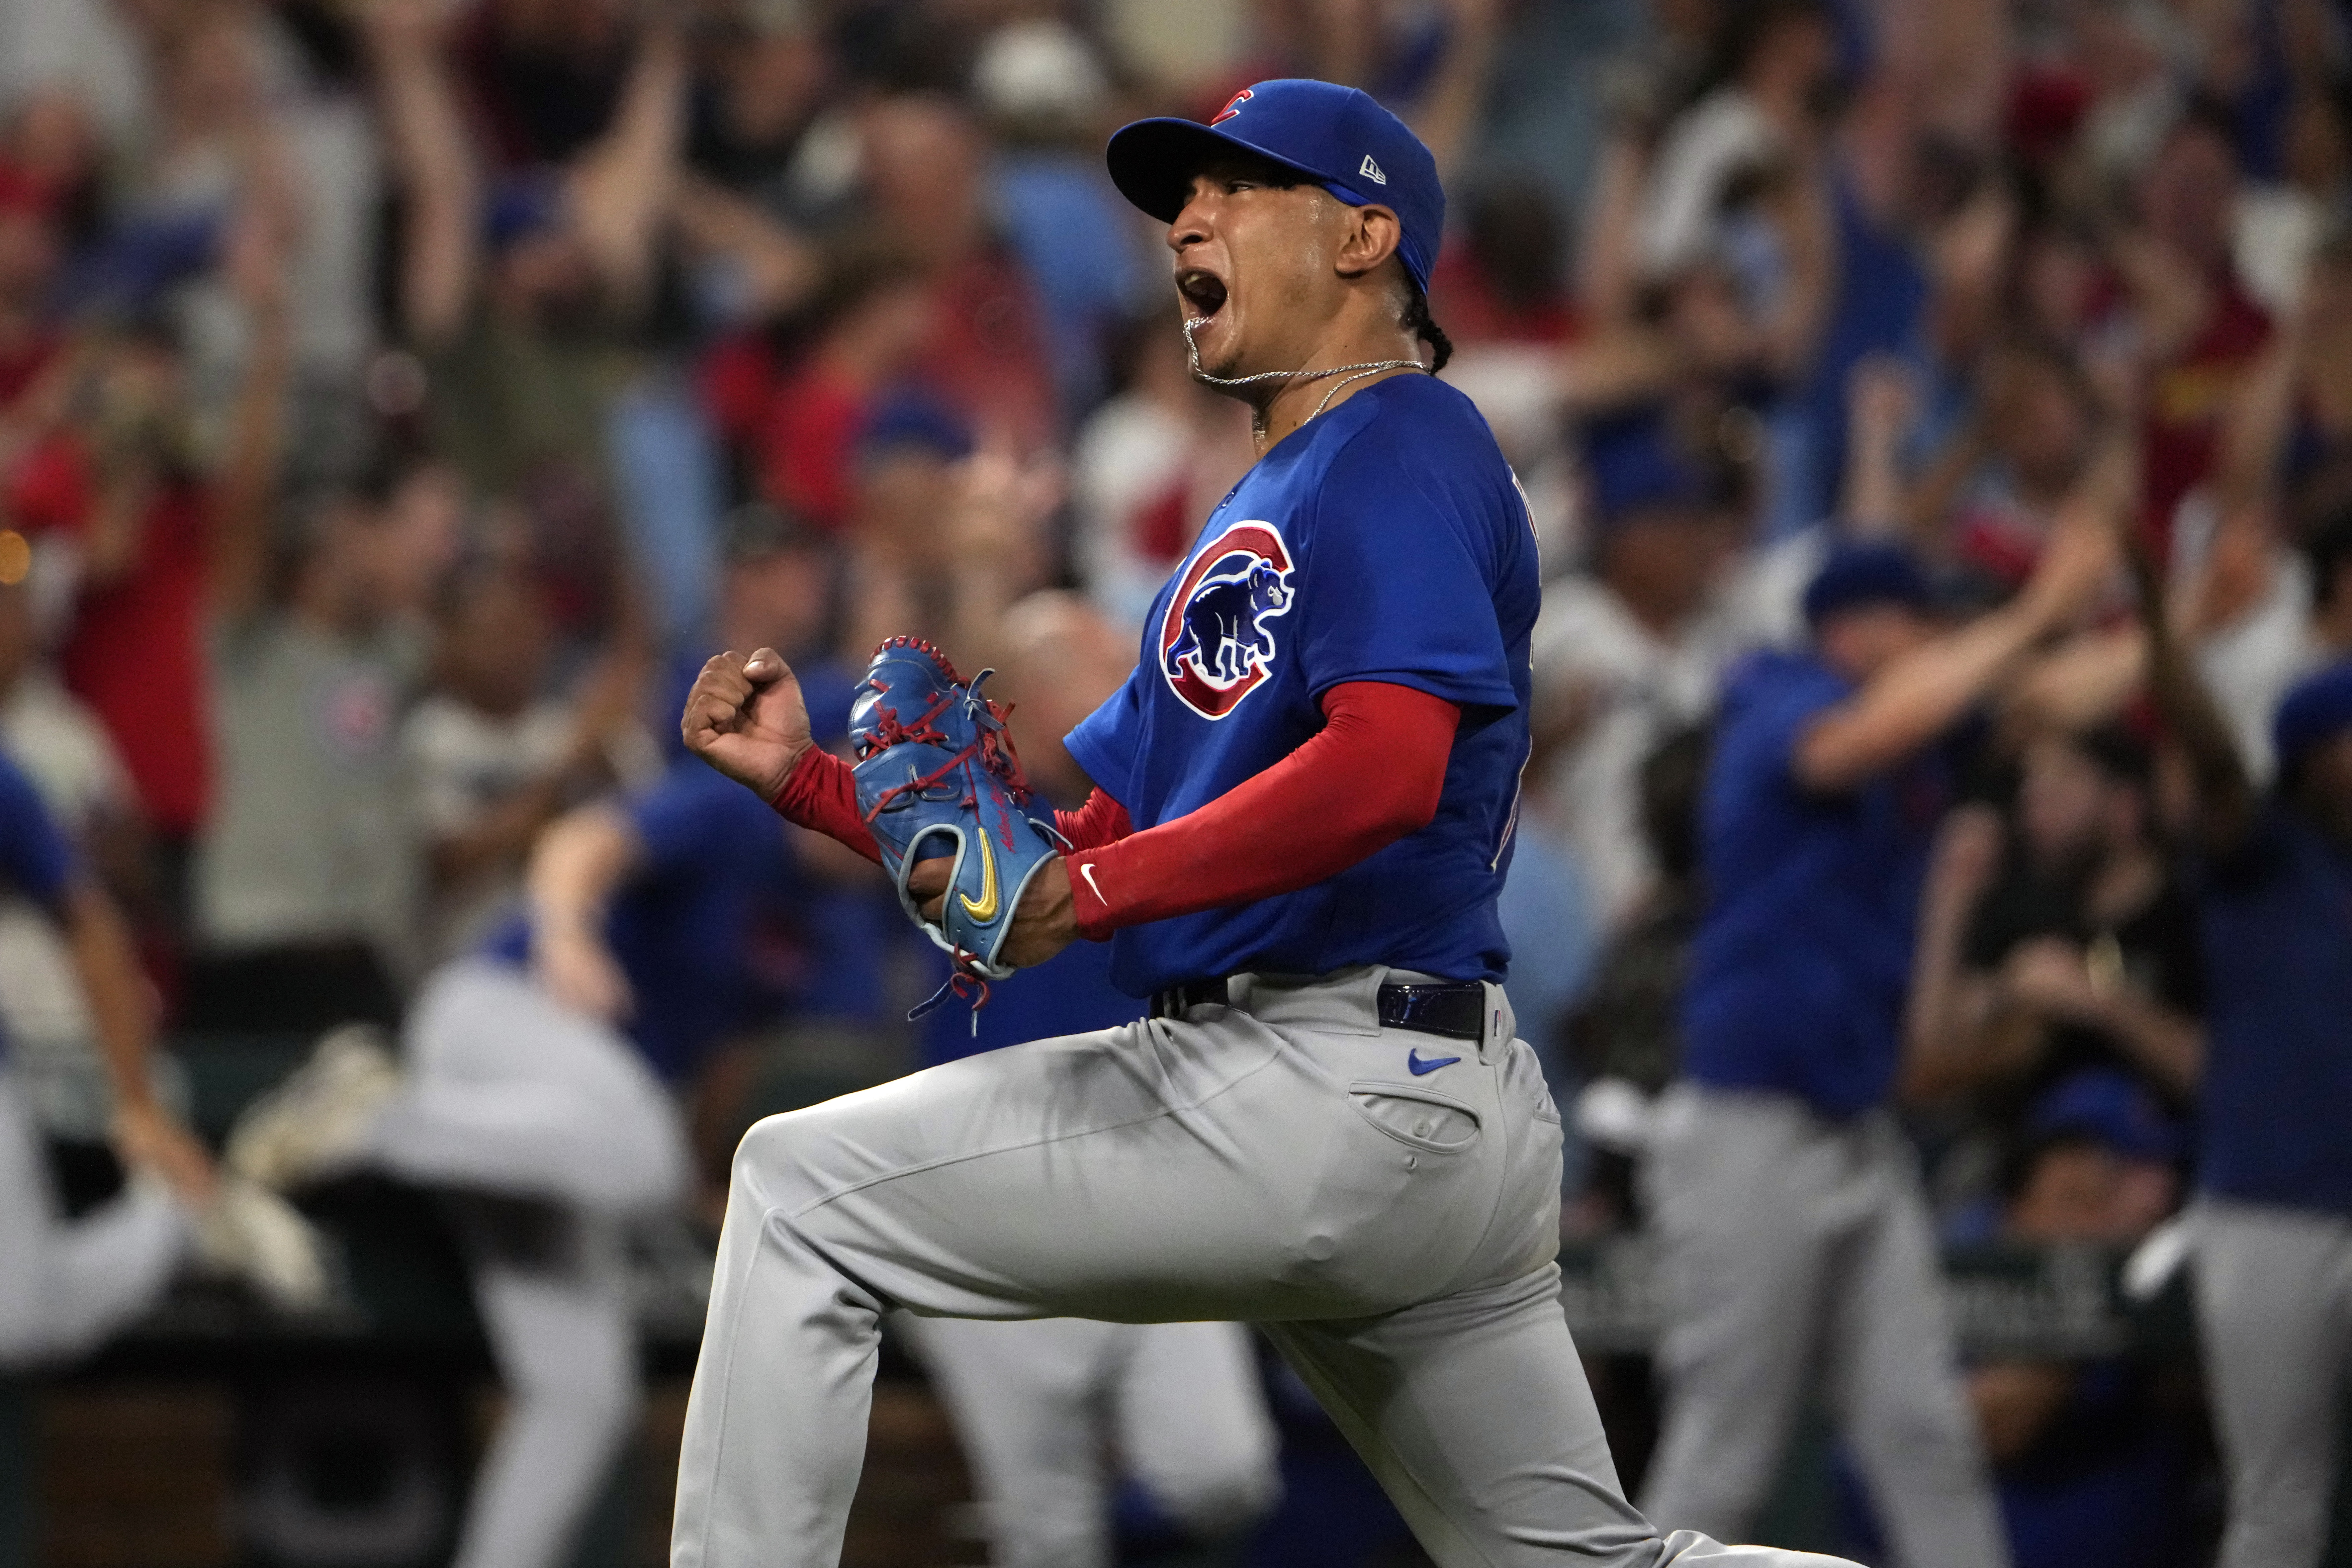 Adbert Alzolay gives Cubs a unicorn to dream on ahead of 1st MLB start -  Chicago Sun-Times